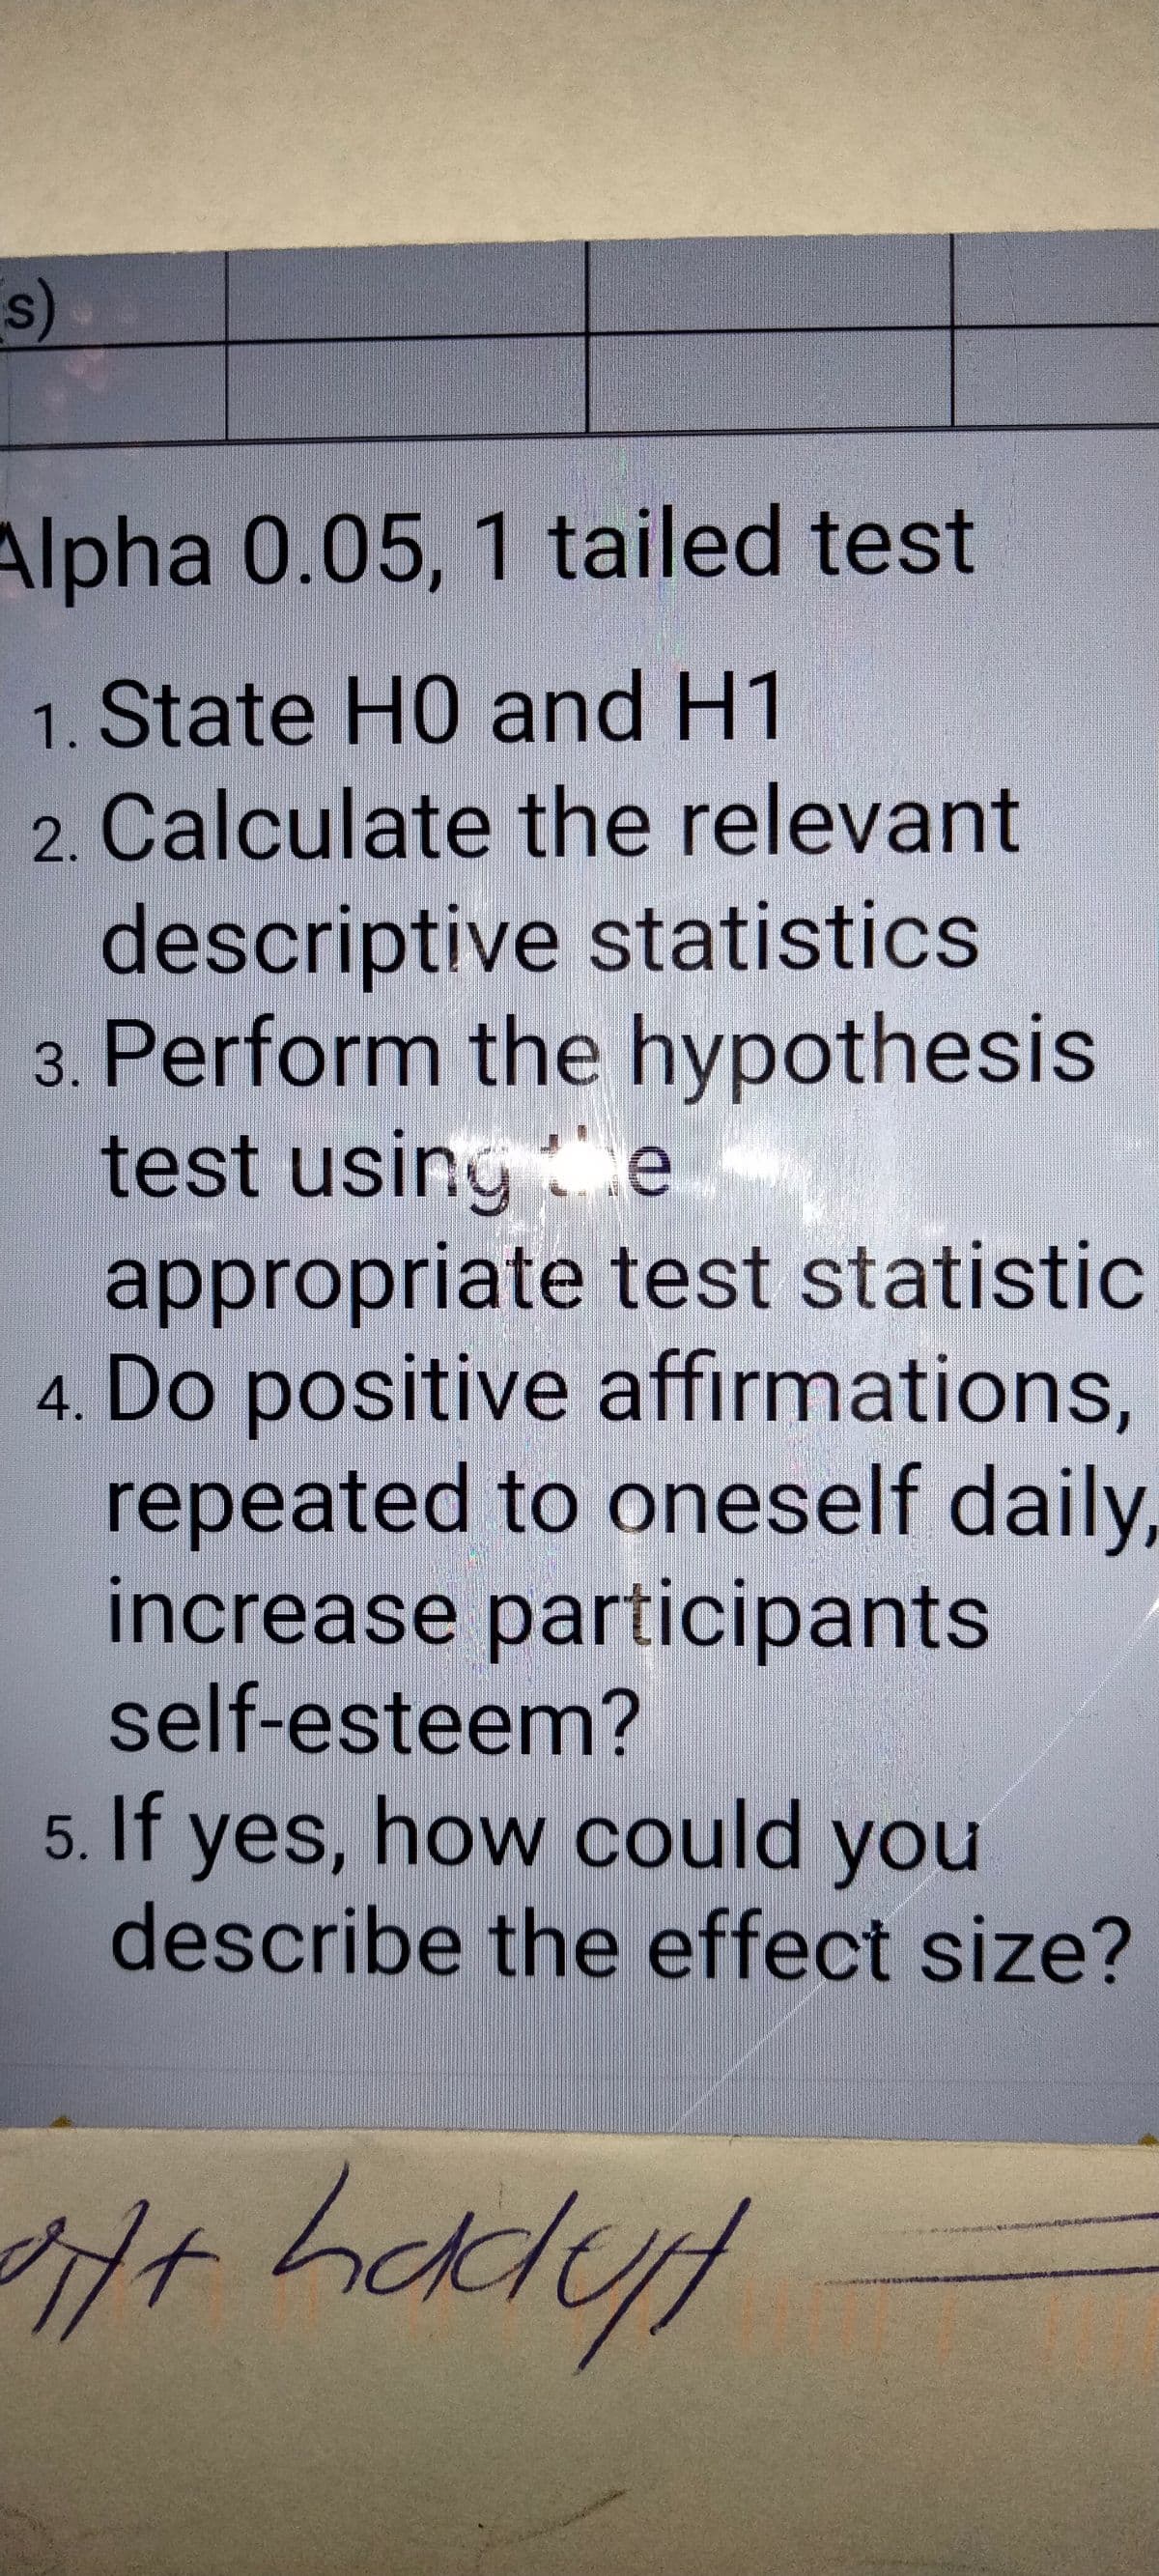 s)
Alpha 0.05, 1 tailed test
1. State HO and H1
2. Calculate the relevant
descriptive statistics
3. Perform the hypothesis
test using e
appropriate test statistic
4. Do positive affirmations,
repeated to oneself daily,
increase participants
self-esteem?
5. If yes, how could you
describe the effect size?
halyp
